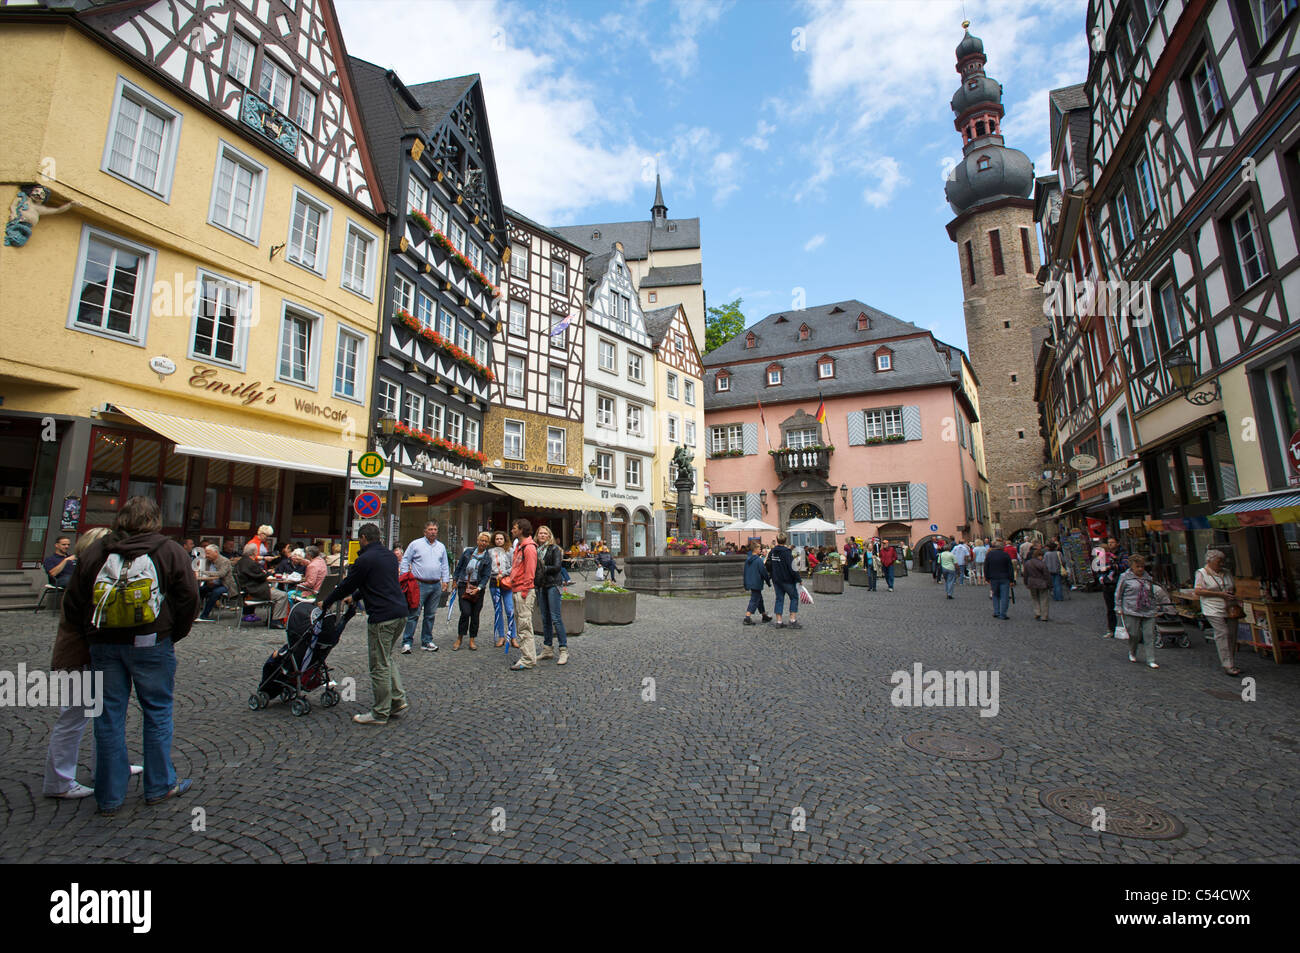 Town square with typical half-timber architecture and city hall in Cochem, Germany Stock Photo